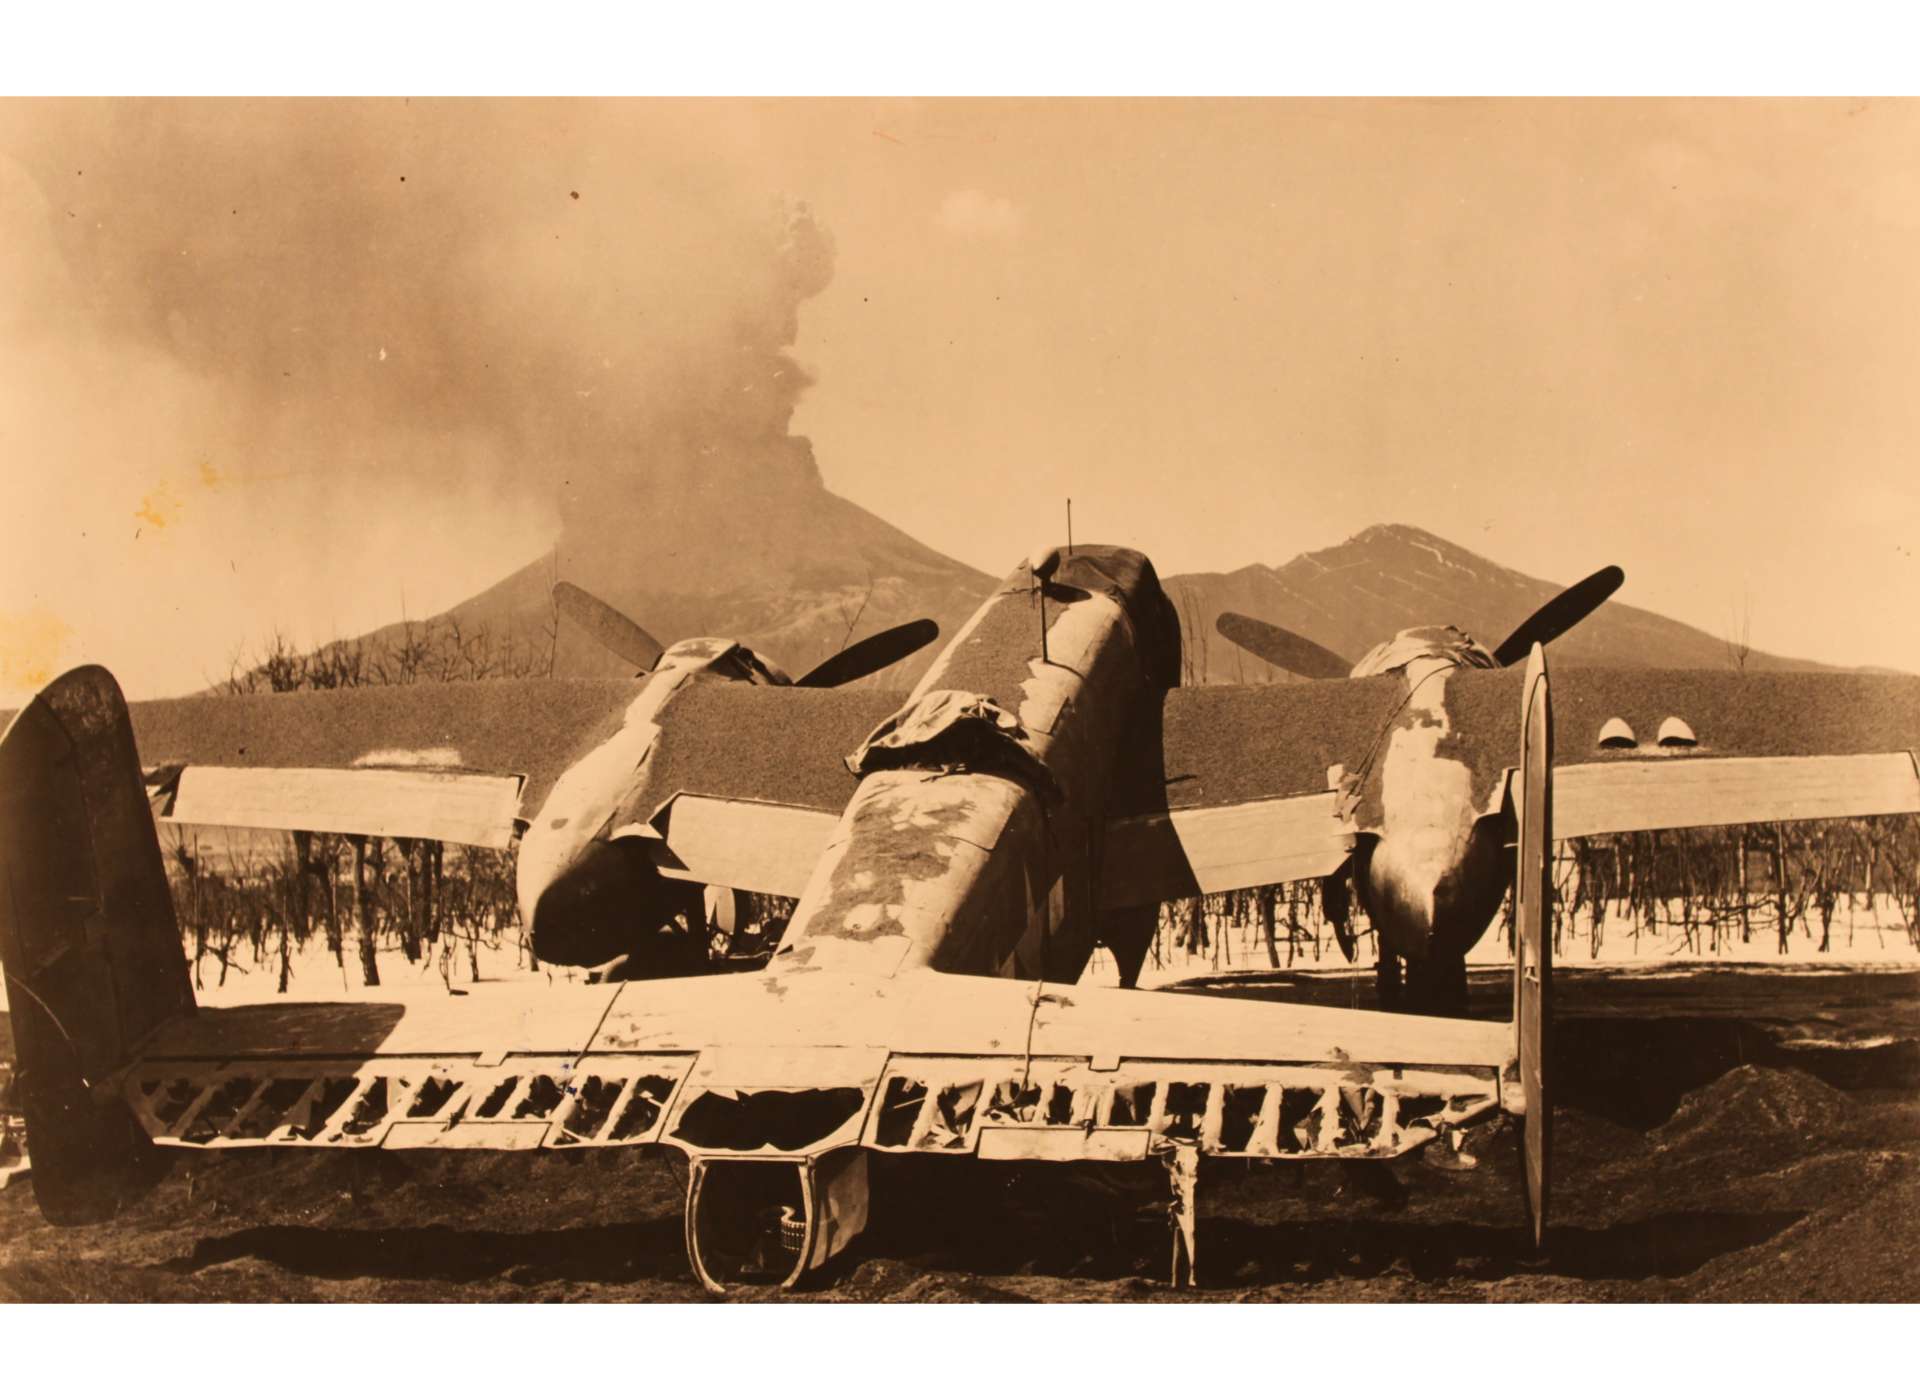 In the shadow of Mount Vesuvius, the wreckage of a charred 340th Bombardment Group B-25 Mitchell lies in the ashes of Pompeii Airfield. Courtesy National Archives.